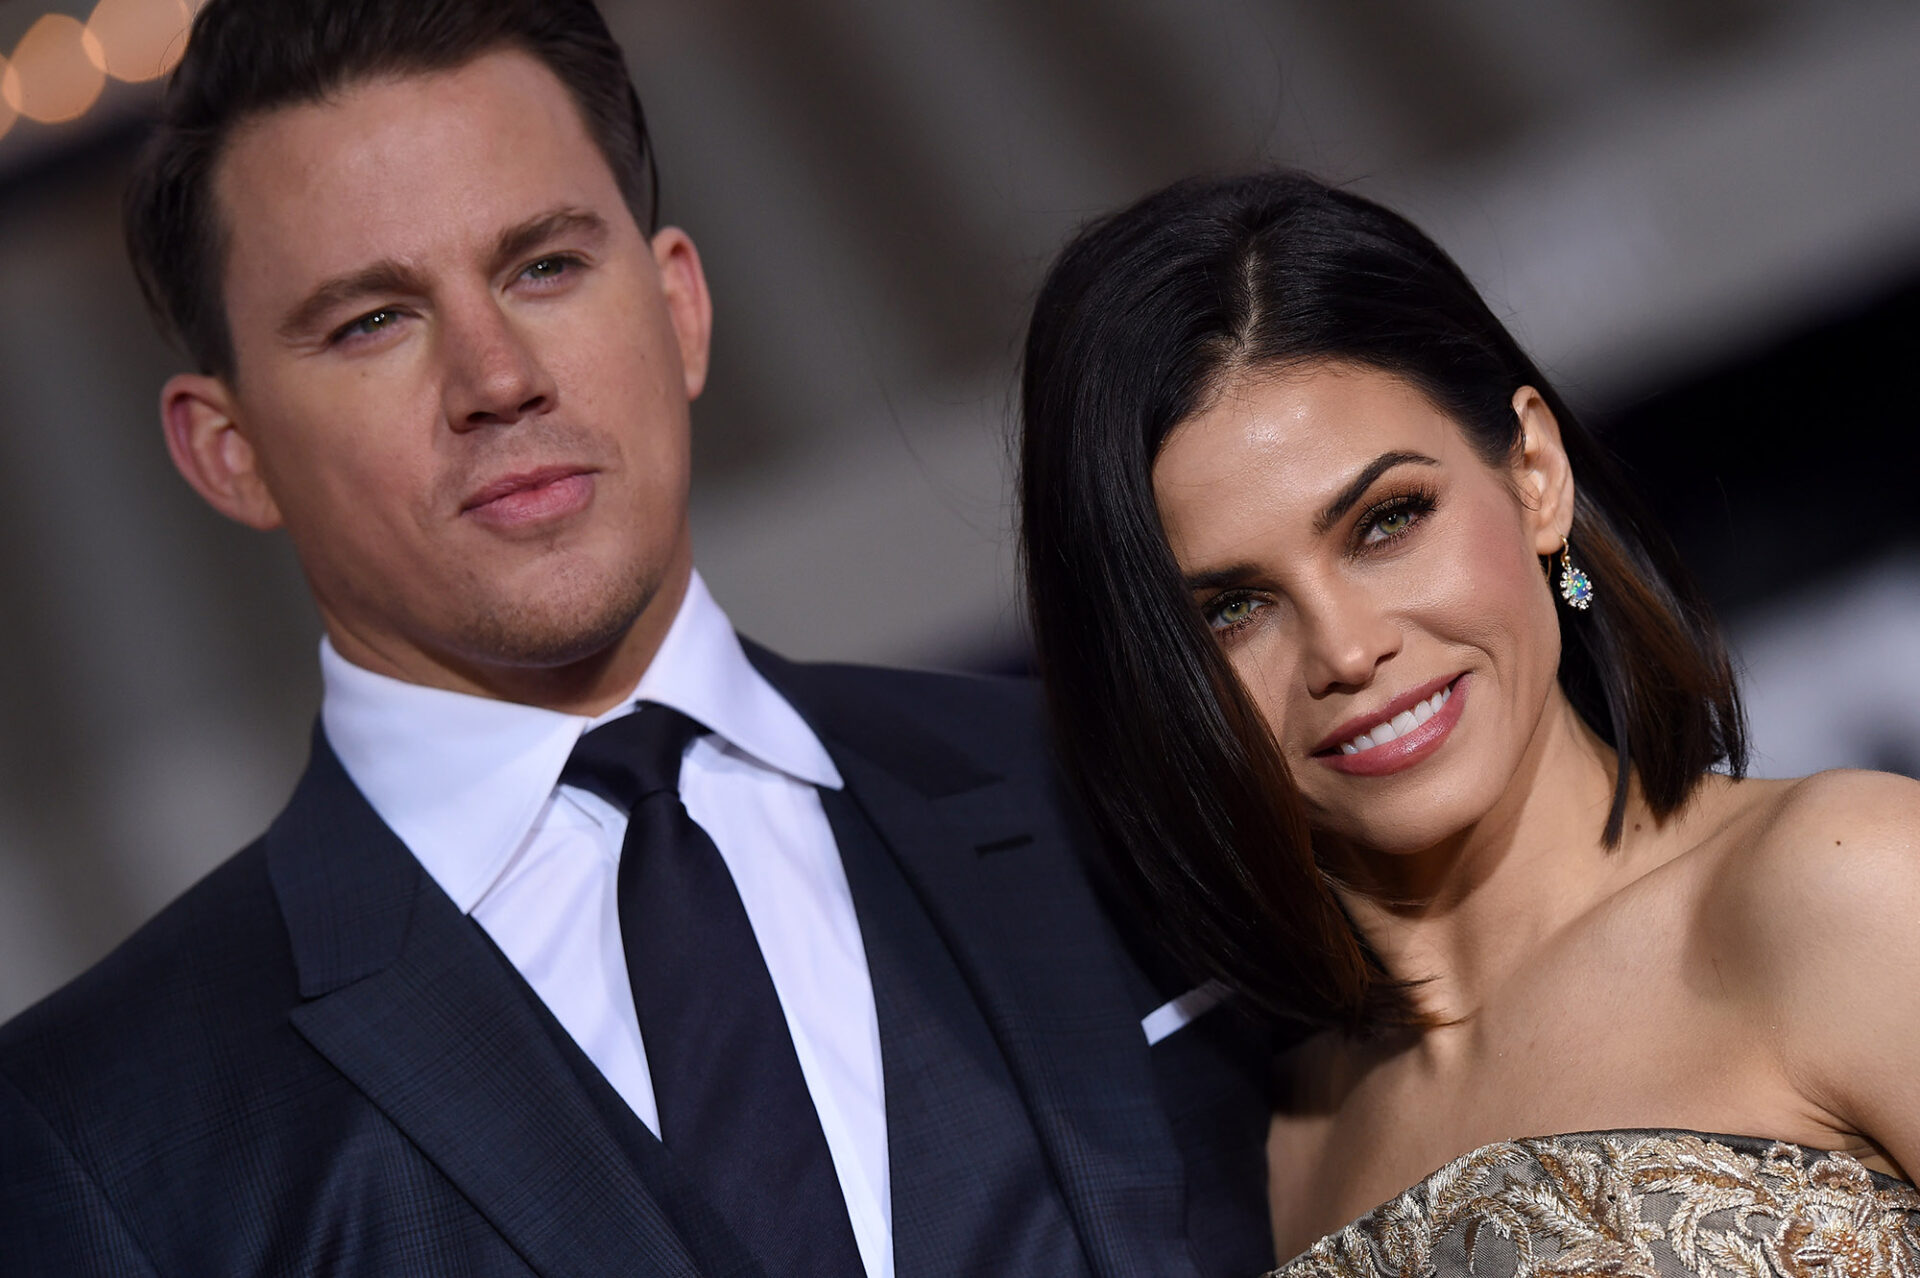 WESTWOOD, CA - FEBRUARY 01: Actors Channing Tatum and Jenna Dewan-Tatum arrive at the premiere of Universal Pictures' 'Hail, Caesar!' at Regency Village Theatre on February 1, 2016 in Westwood, California. (Photo by Axelle/Bauer-Griffin/FilmMagic)